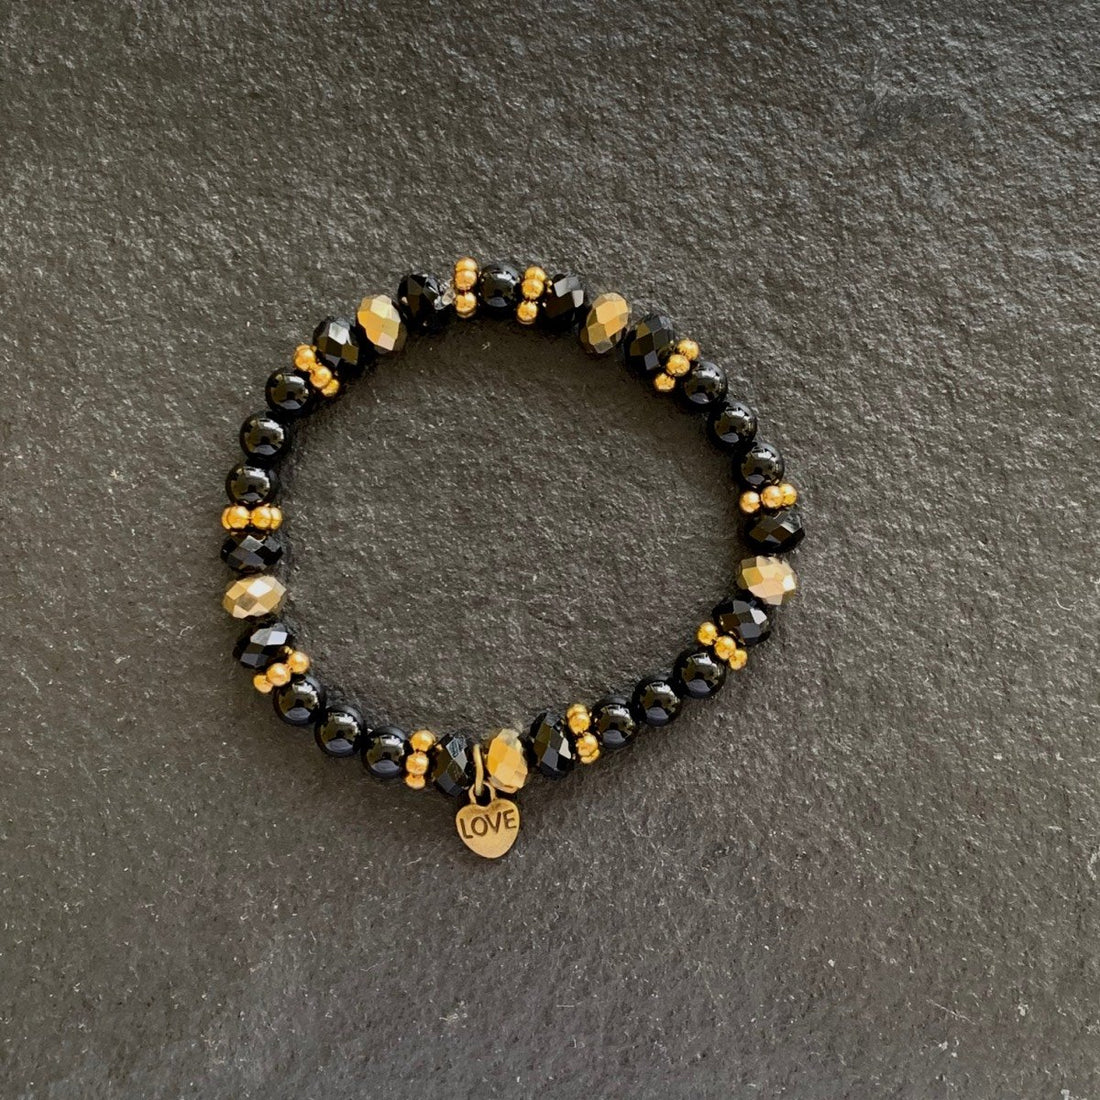 A bracelet made of Black onyx rounds with gold rondels